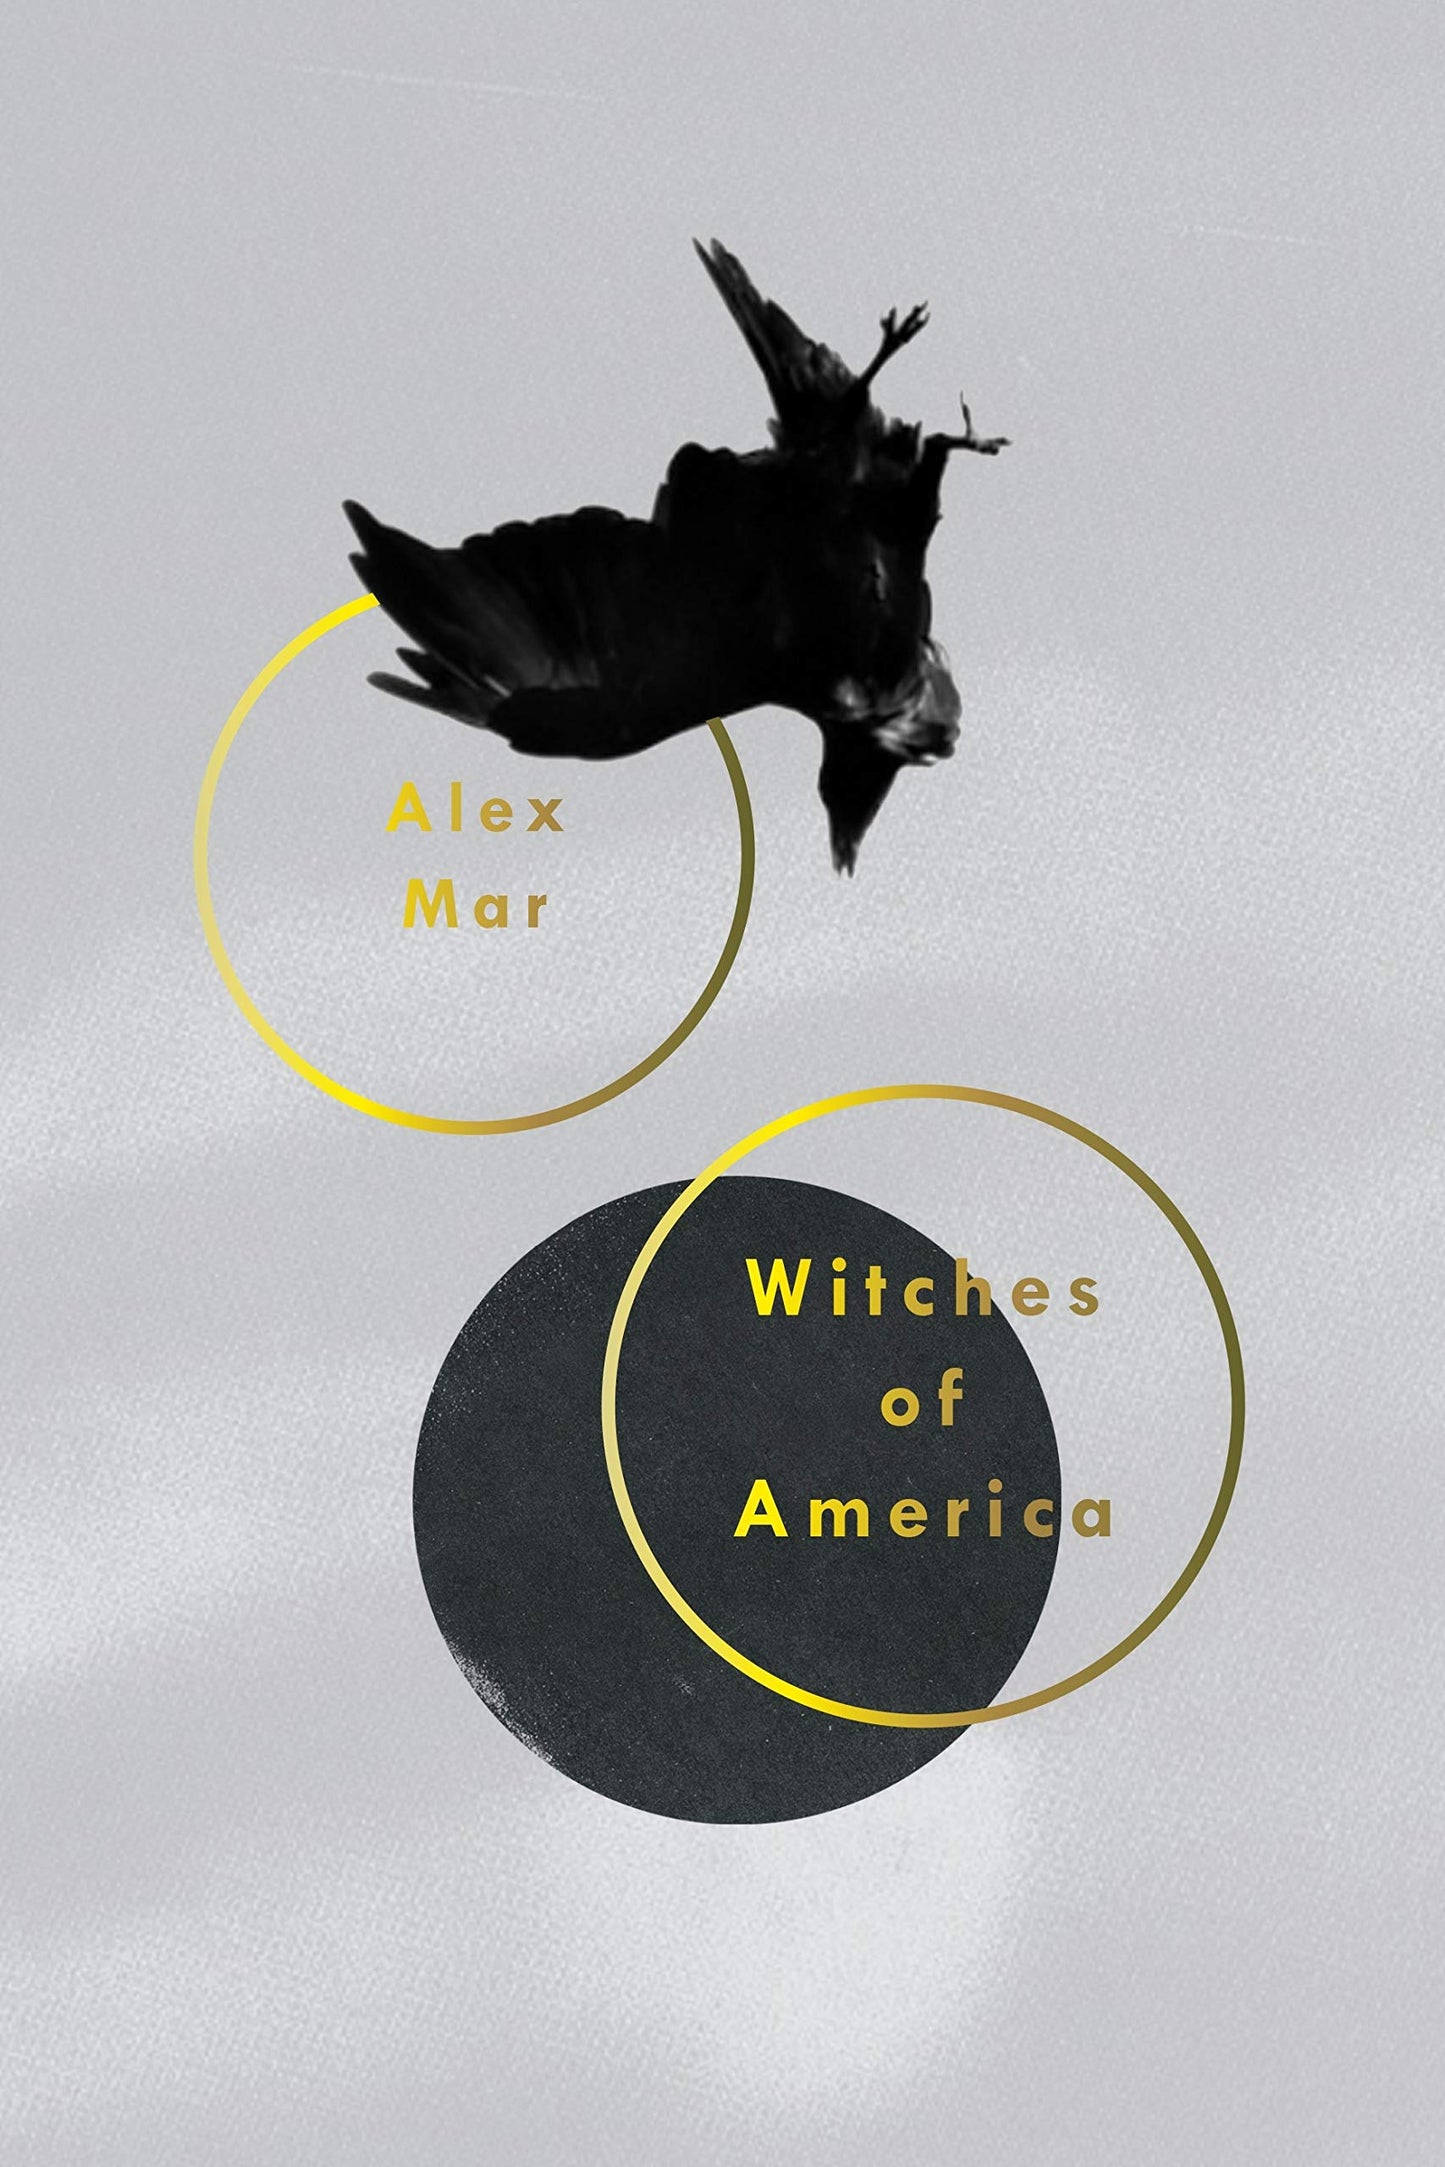 Witches of America, by Alex Mar